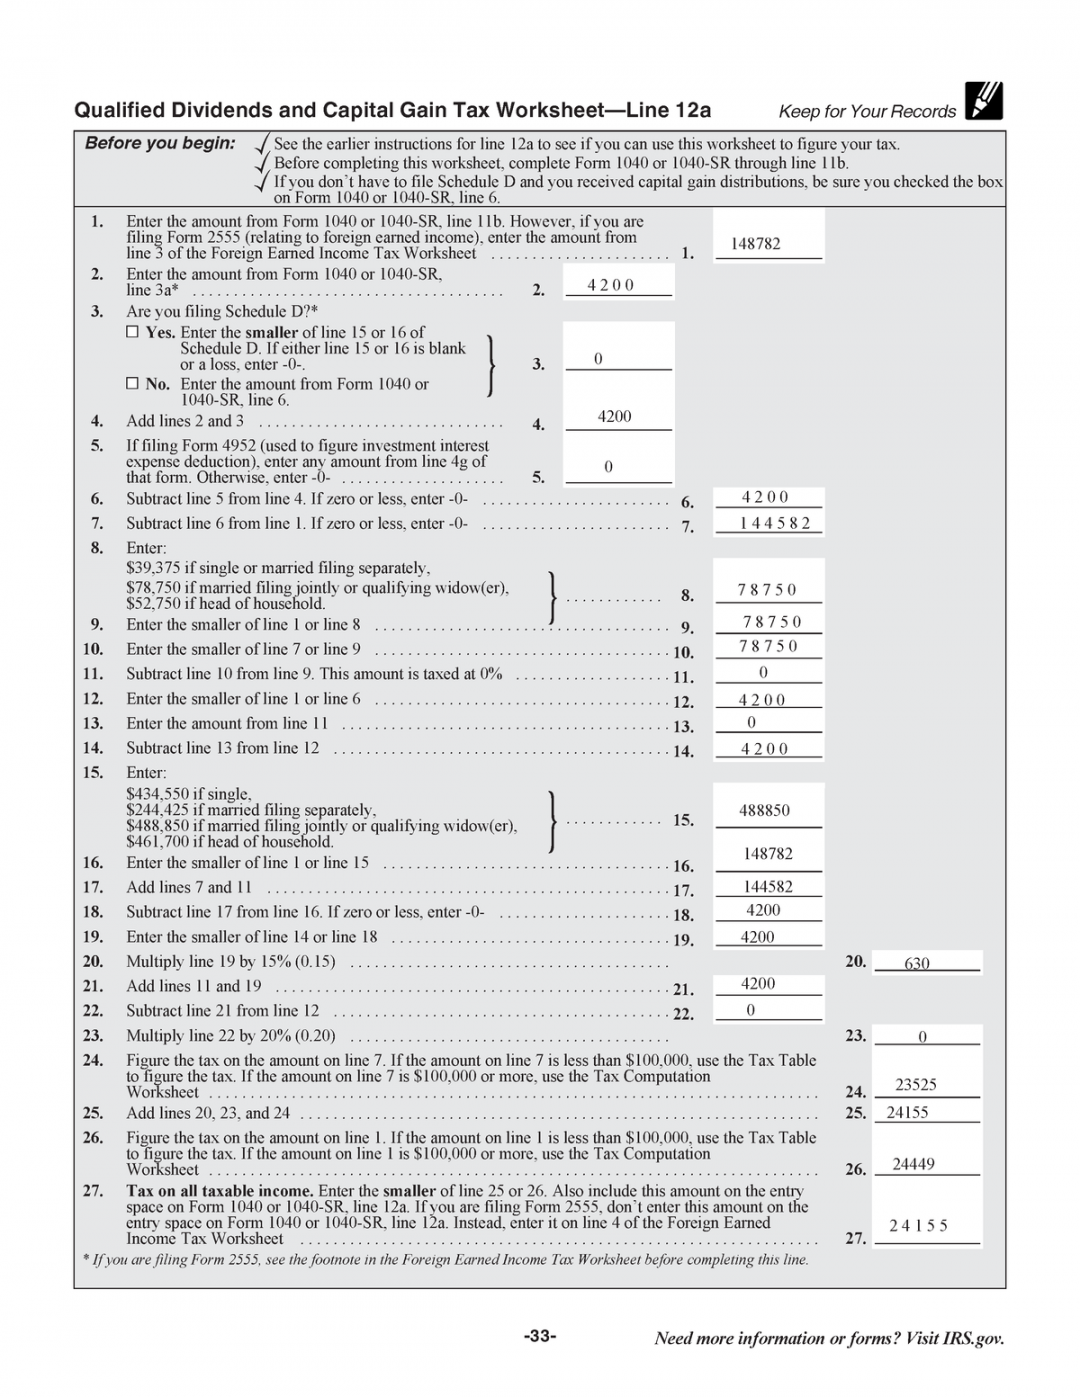 Qualified Dividends and Capital Gains Worksheet - t - SNHU